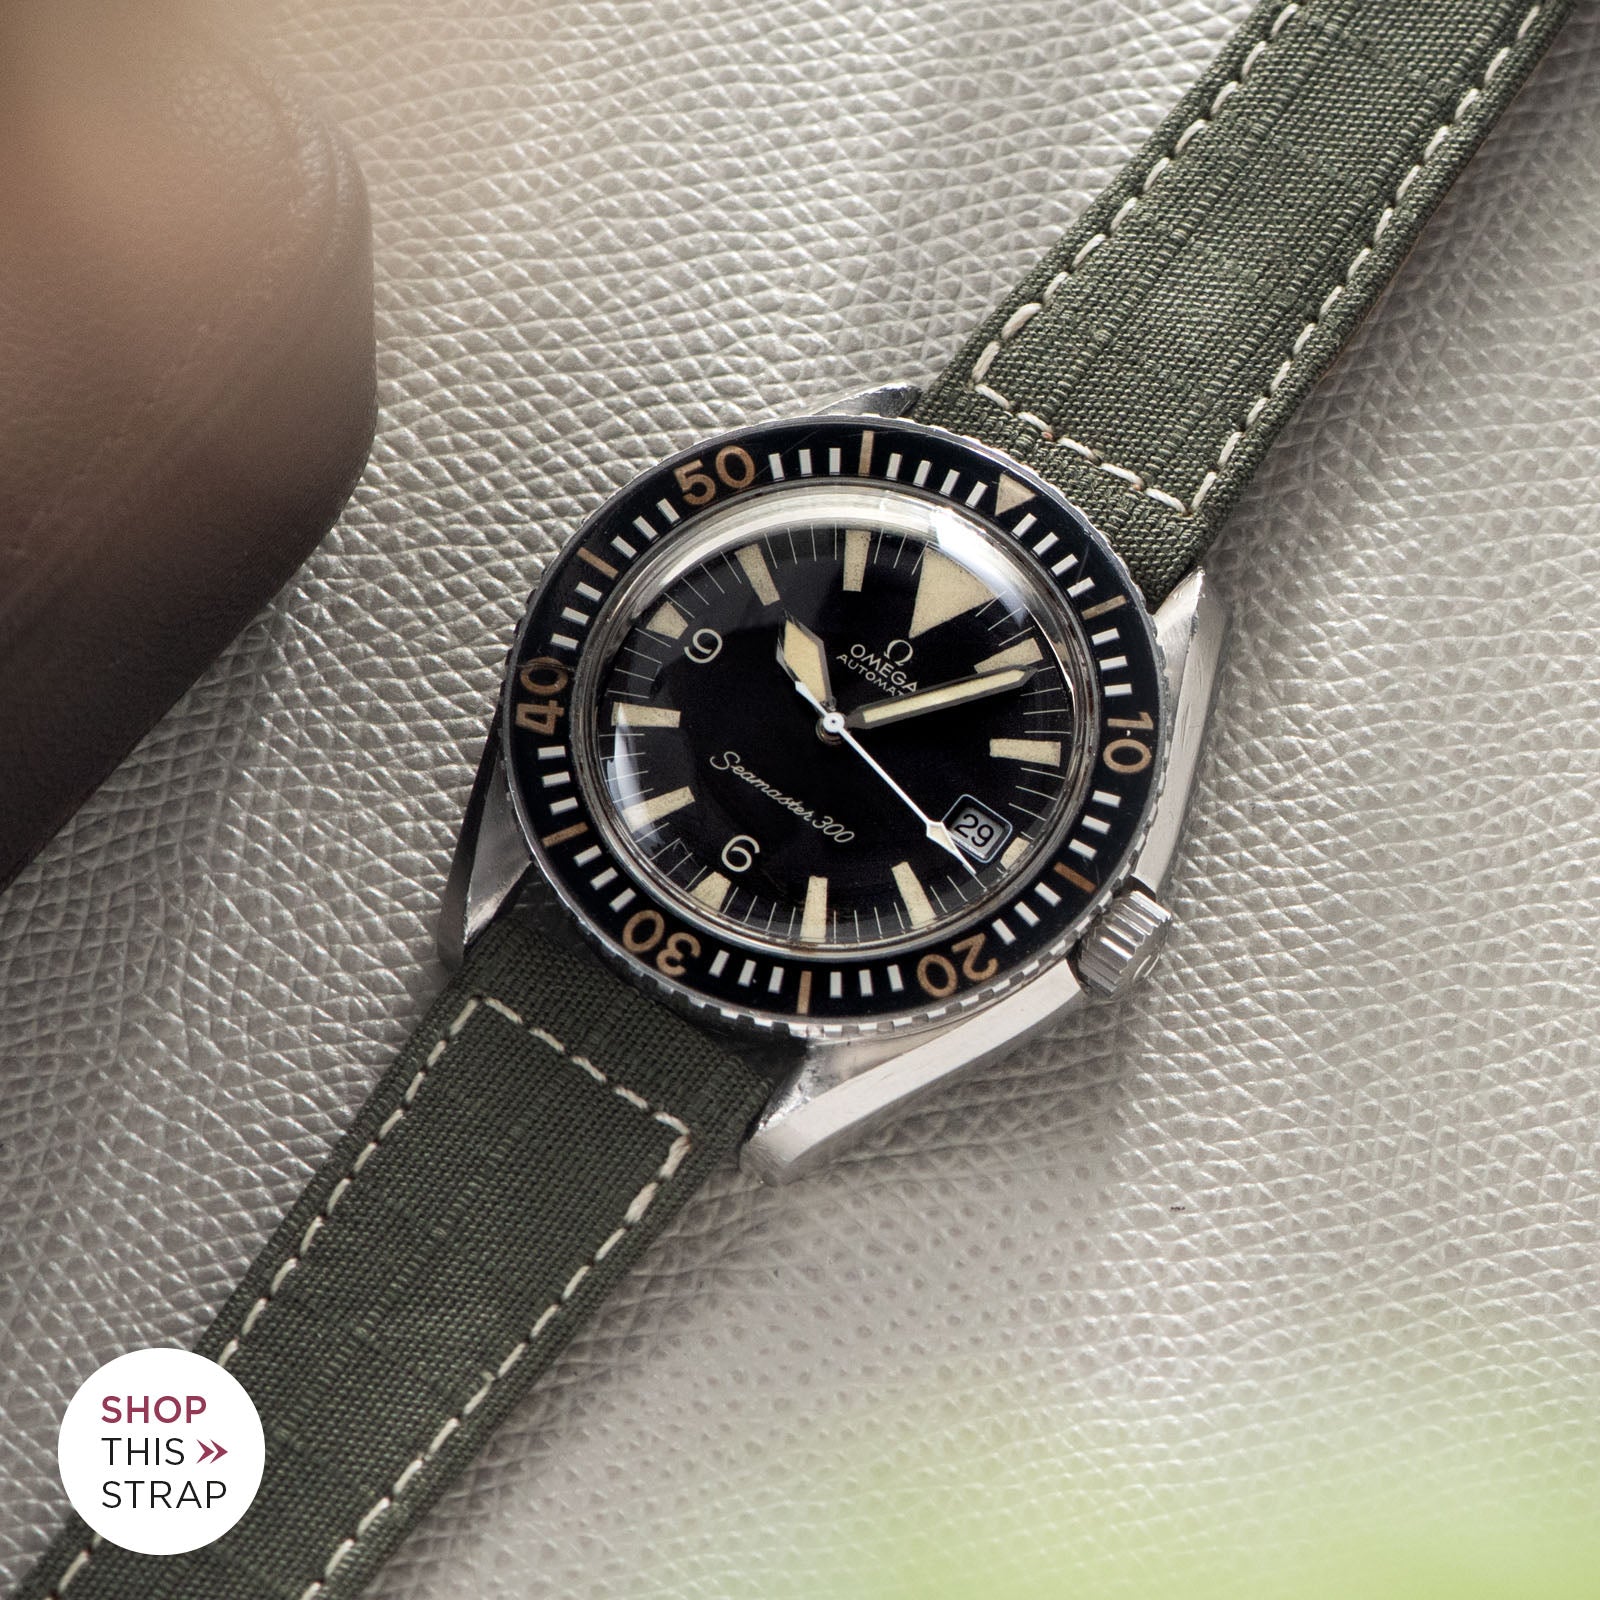 Bulang and Sons_Strap Guide_The omega SM 300 Seamaster_The Ripstop Watch Strap